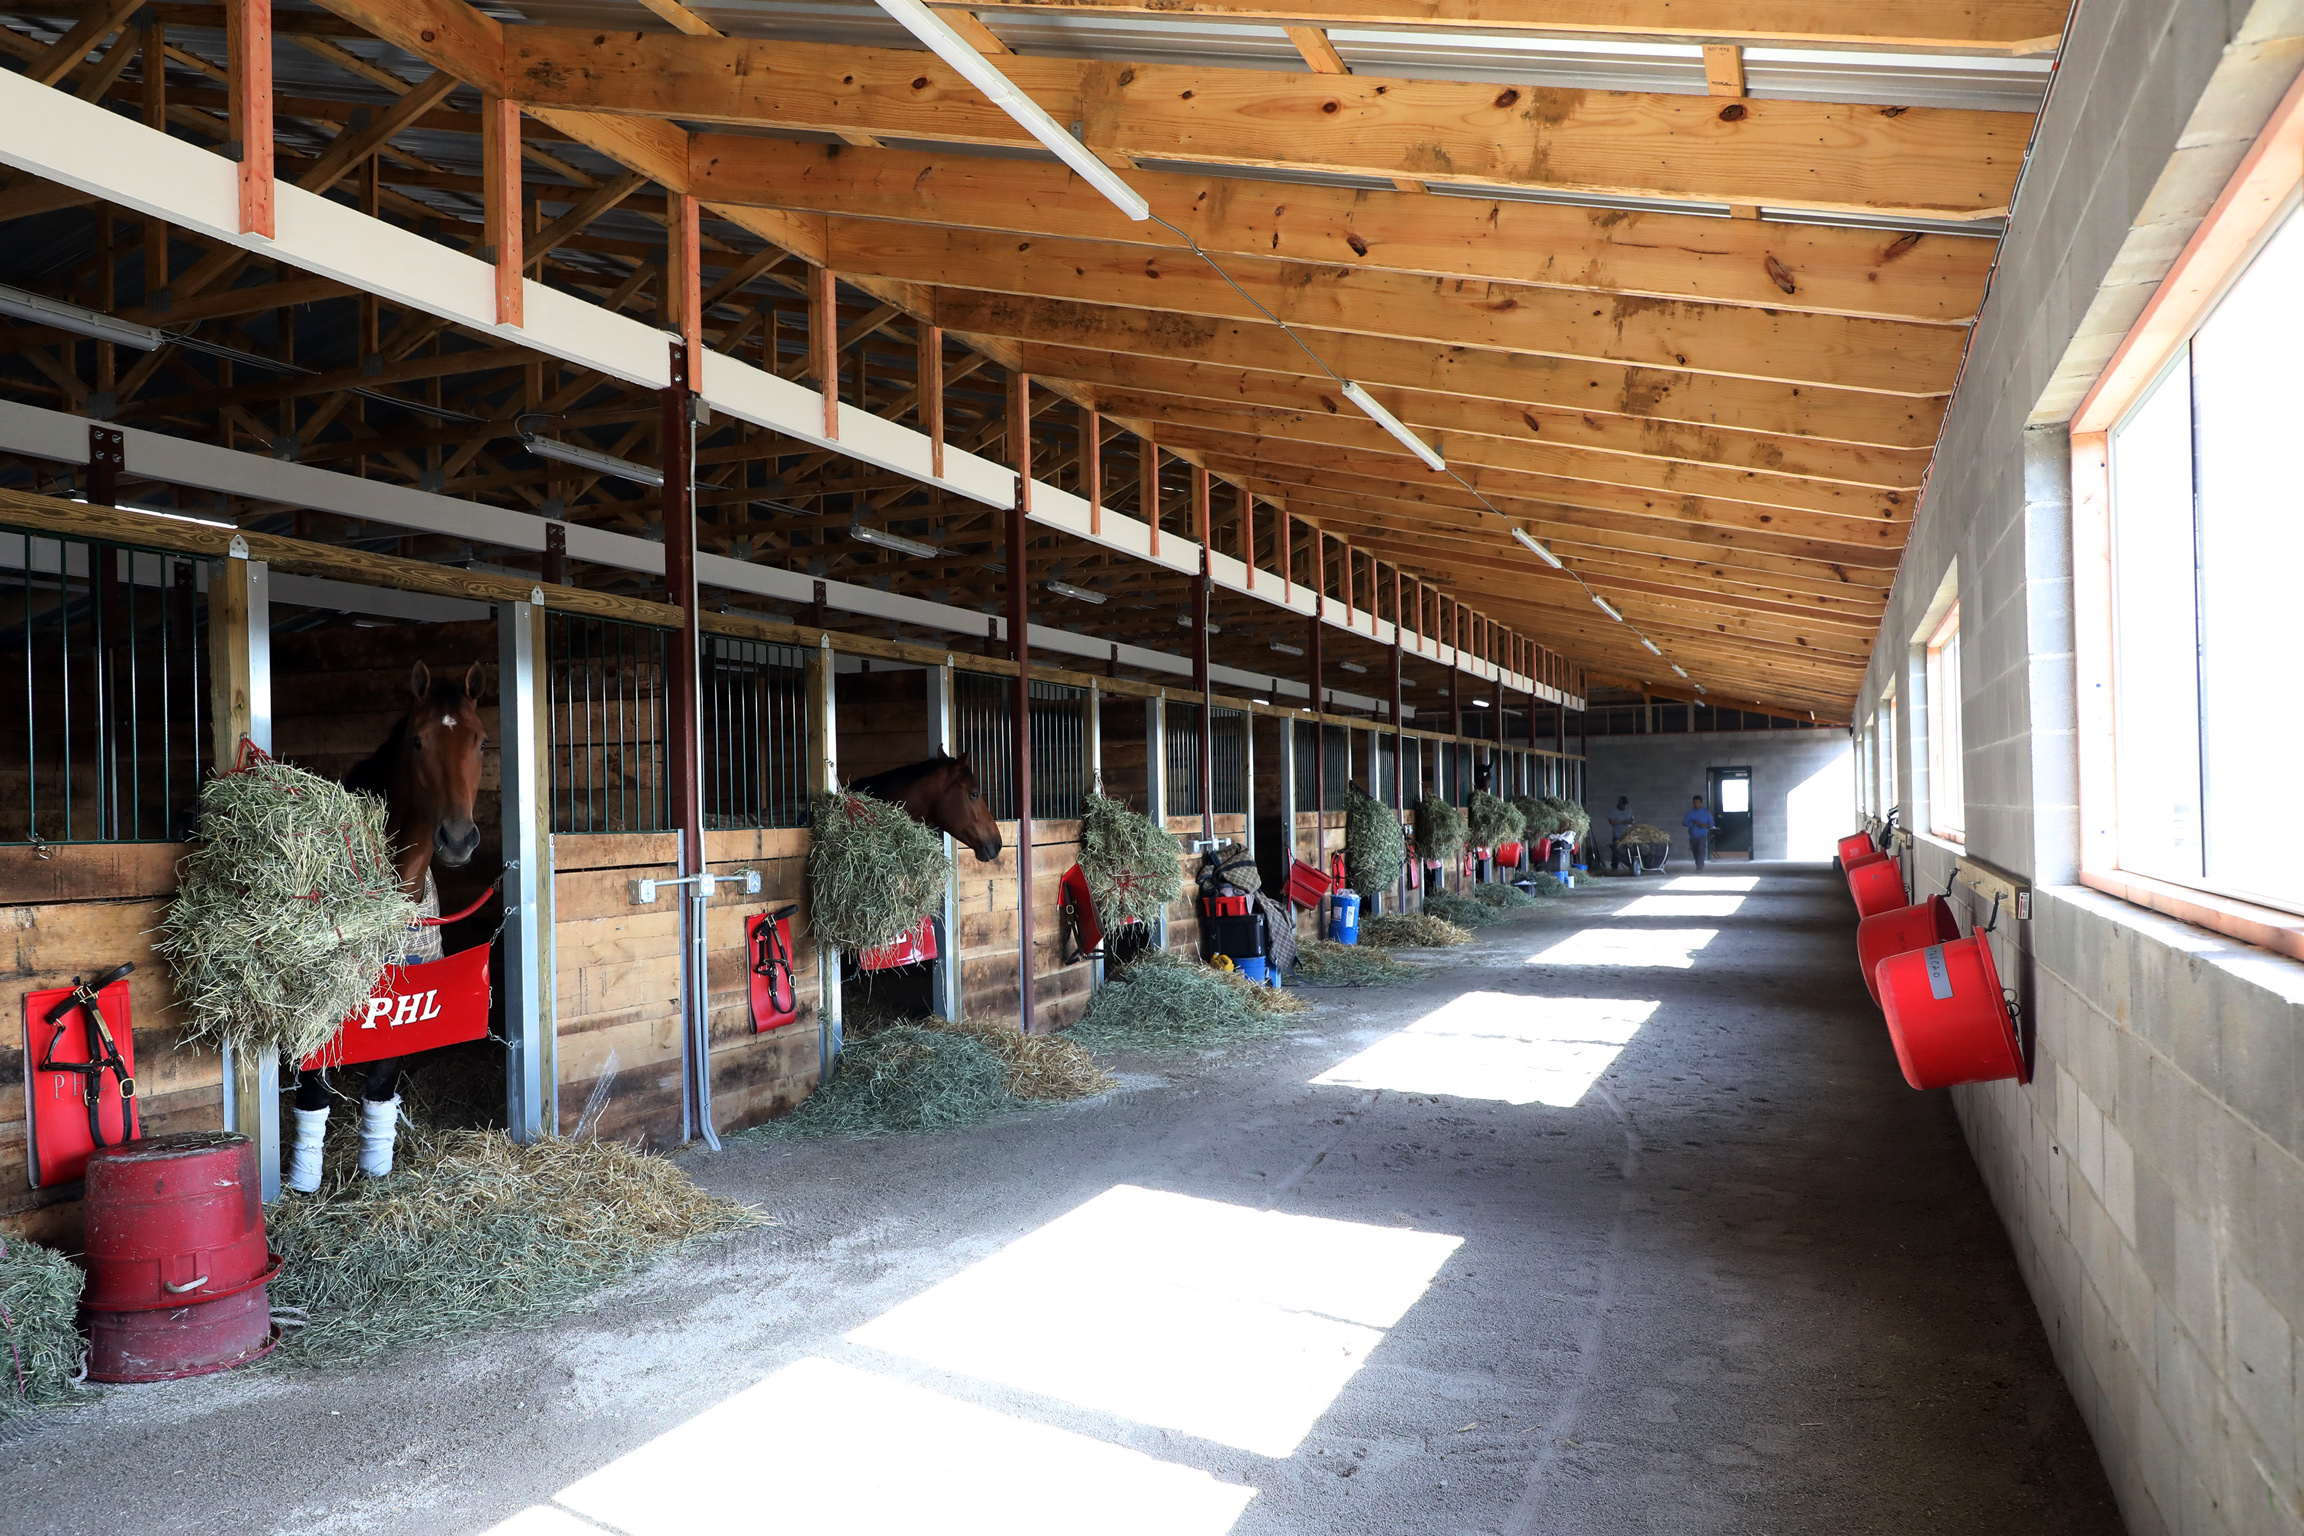 The Thoroughbred Center barn